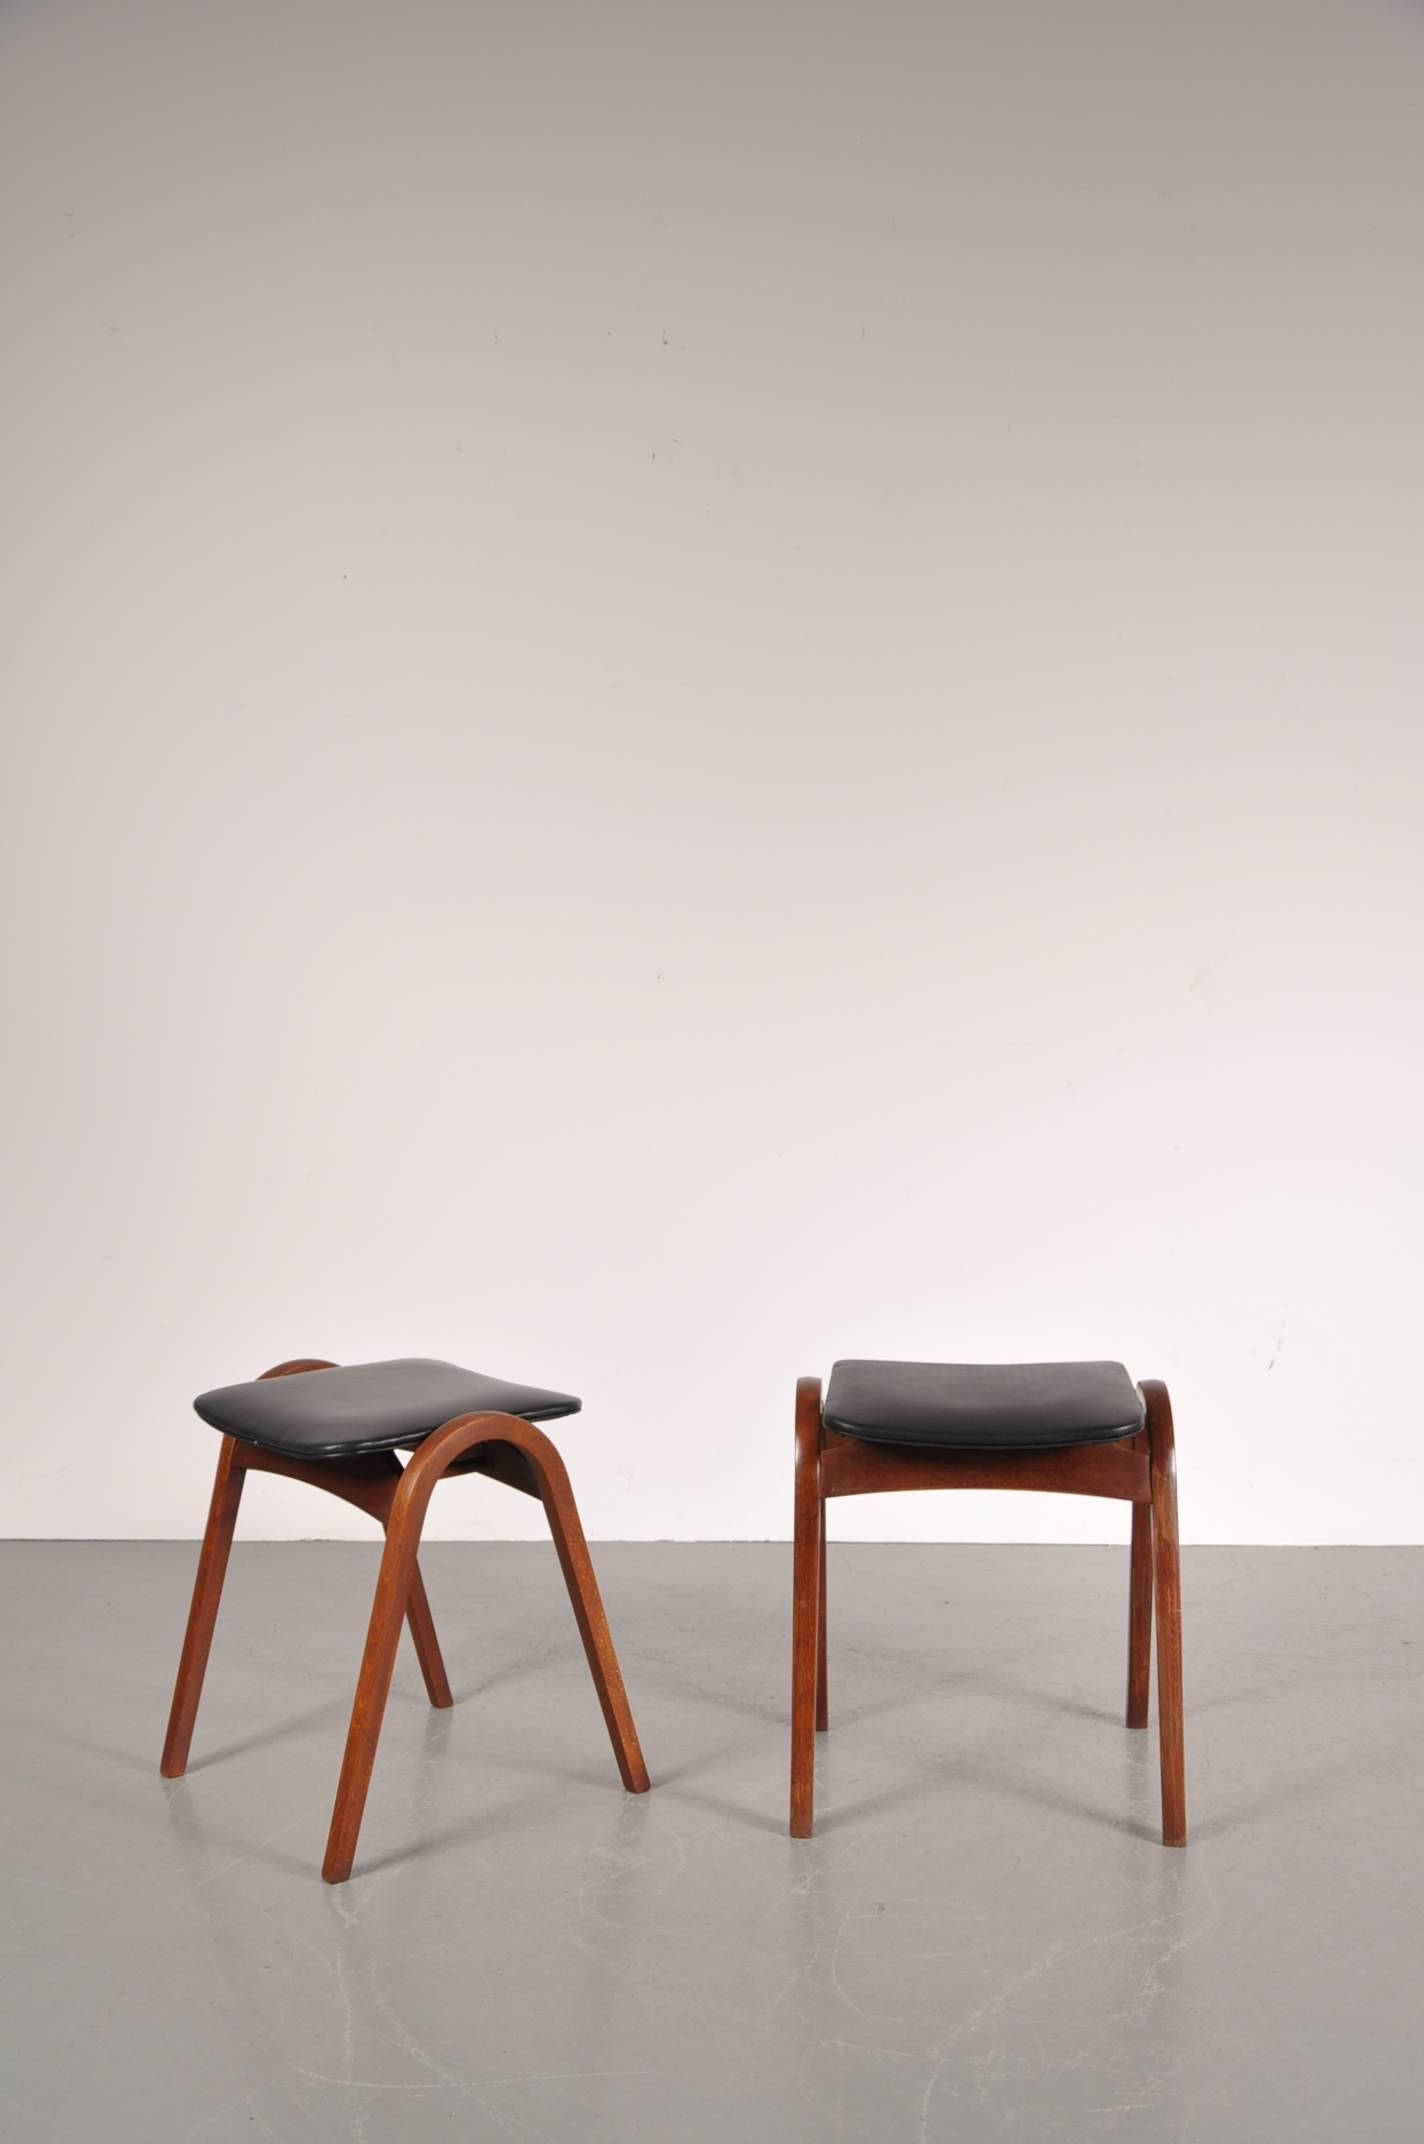 Iconic stacking stools designed by Isamu Kenmochi, manufactured by Tendo in Japan in 1958.

These beautiful, minimalistic stools are made of high quality bent beech wood with a lovely black vinyl upholstery.

When designing this stool,